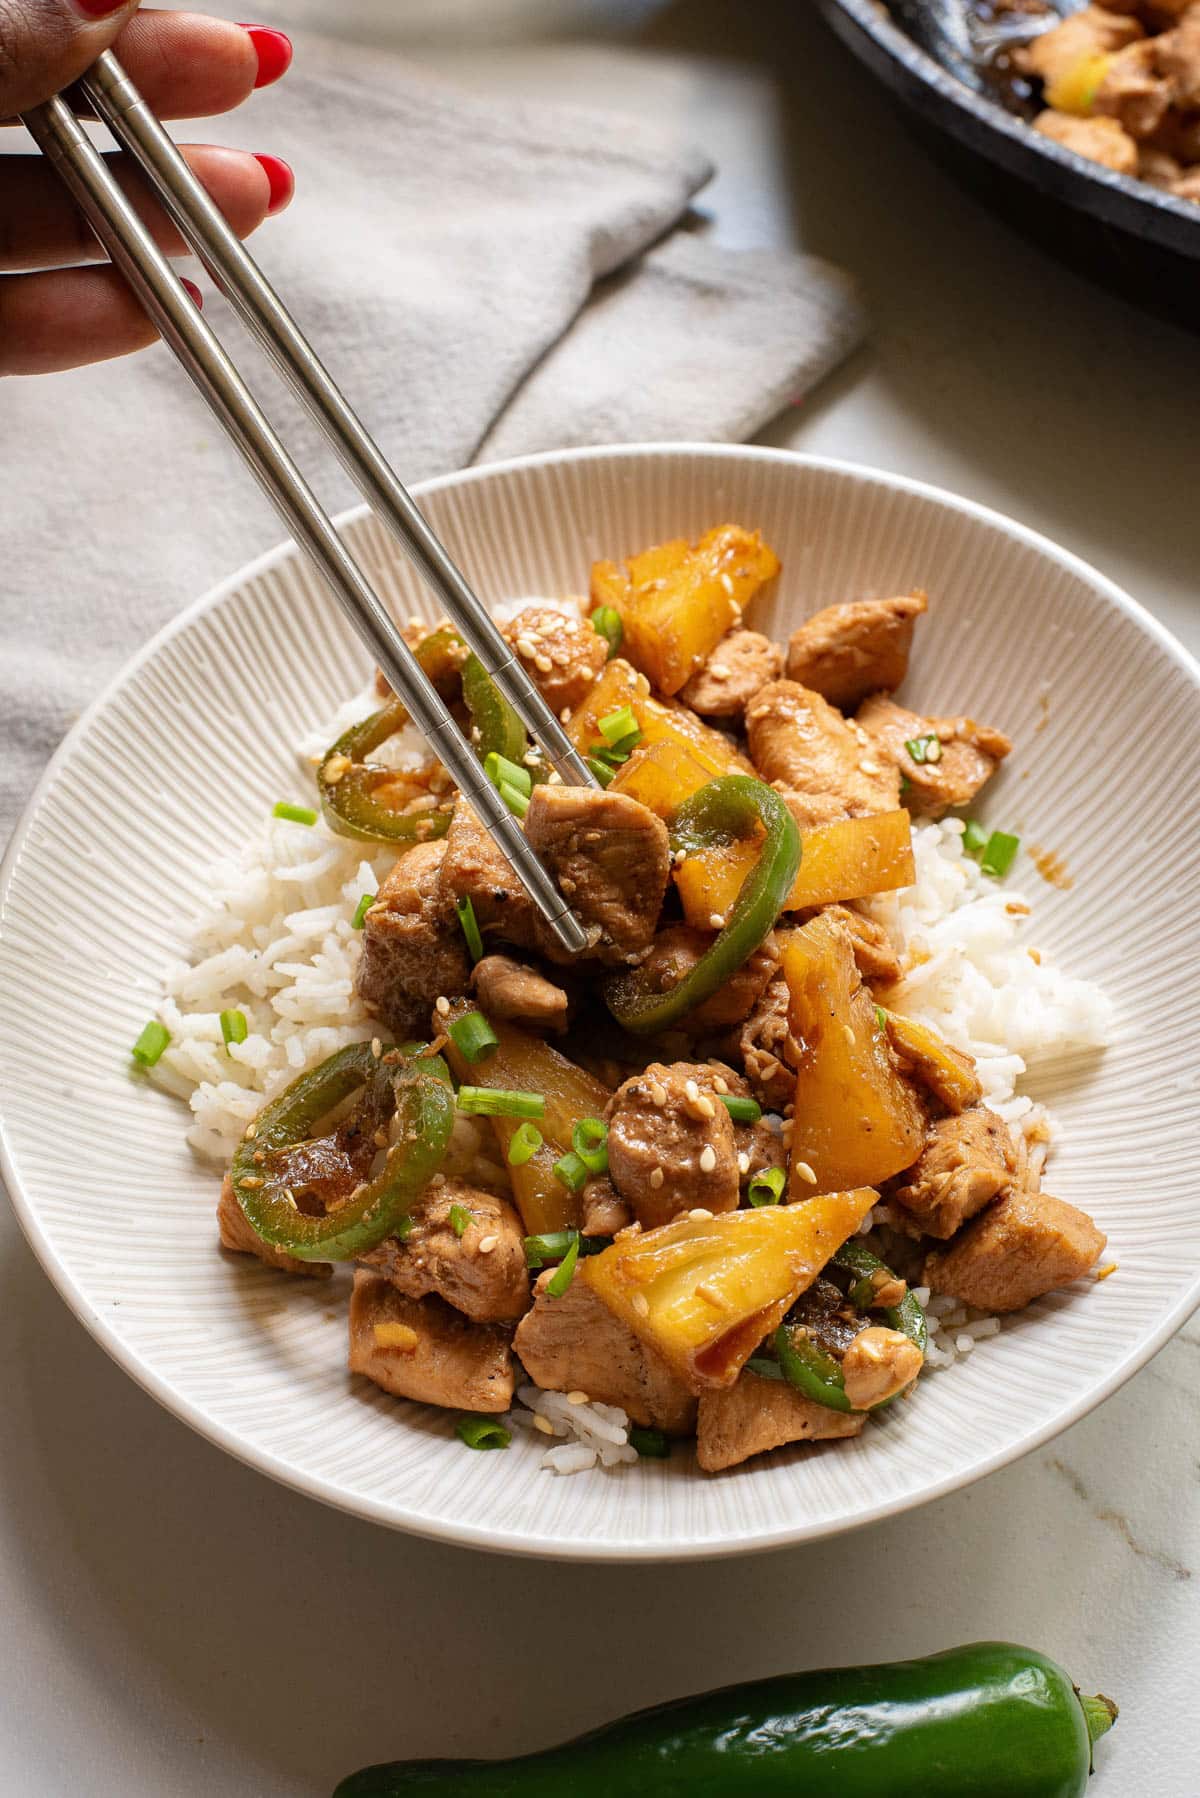 Chicken, pineapple, and jalapenos over white rice in white bowl.